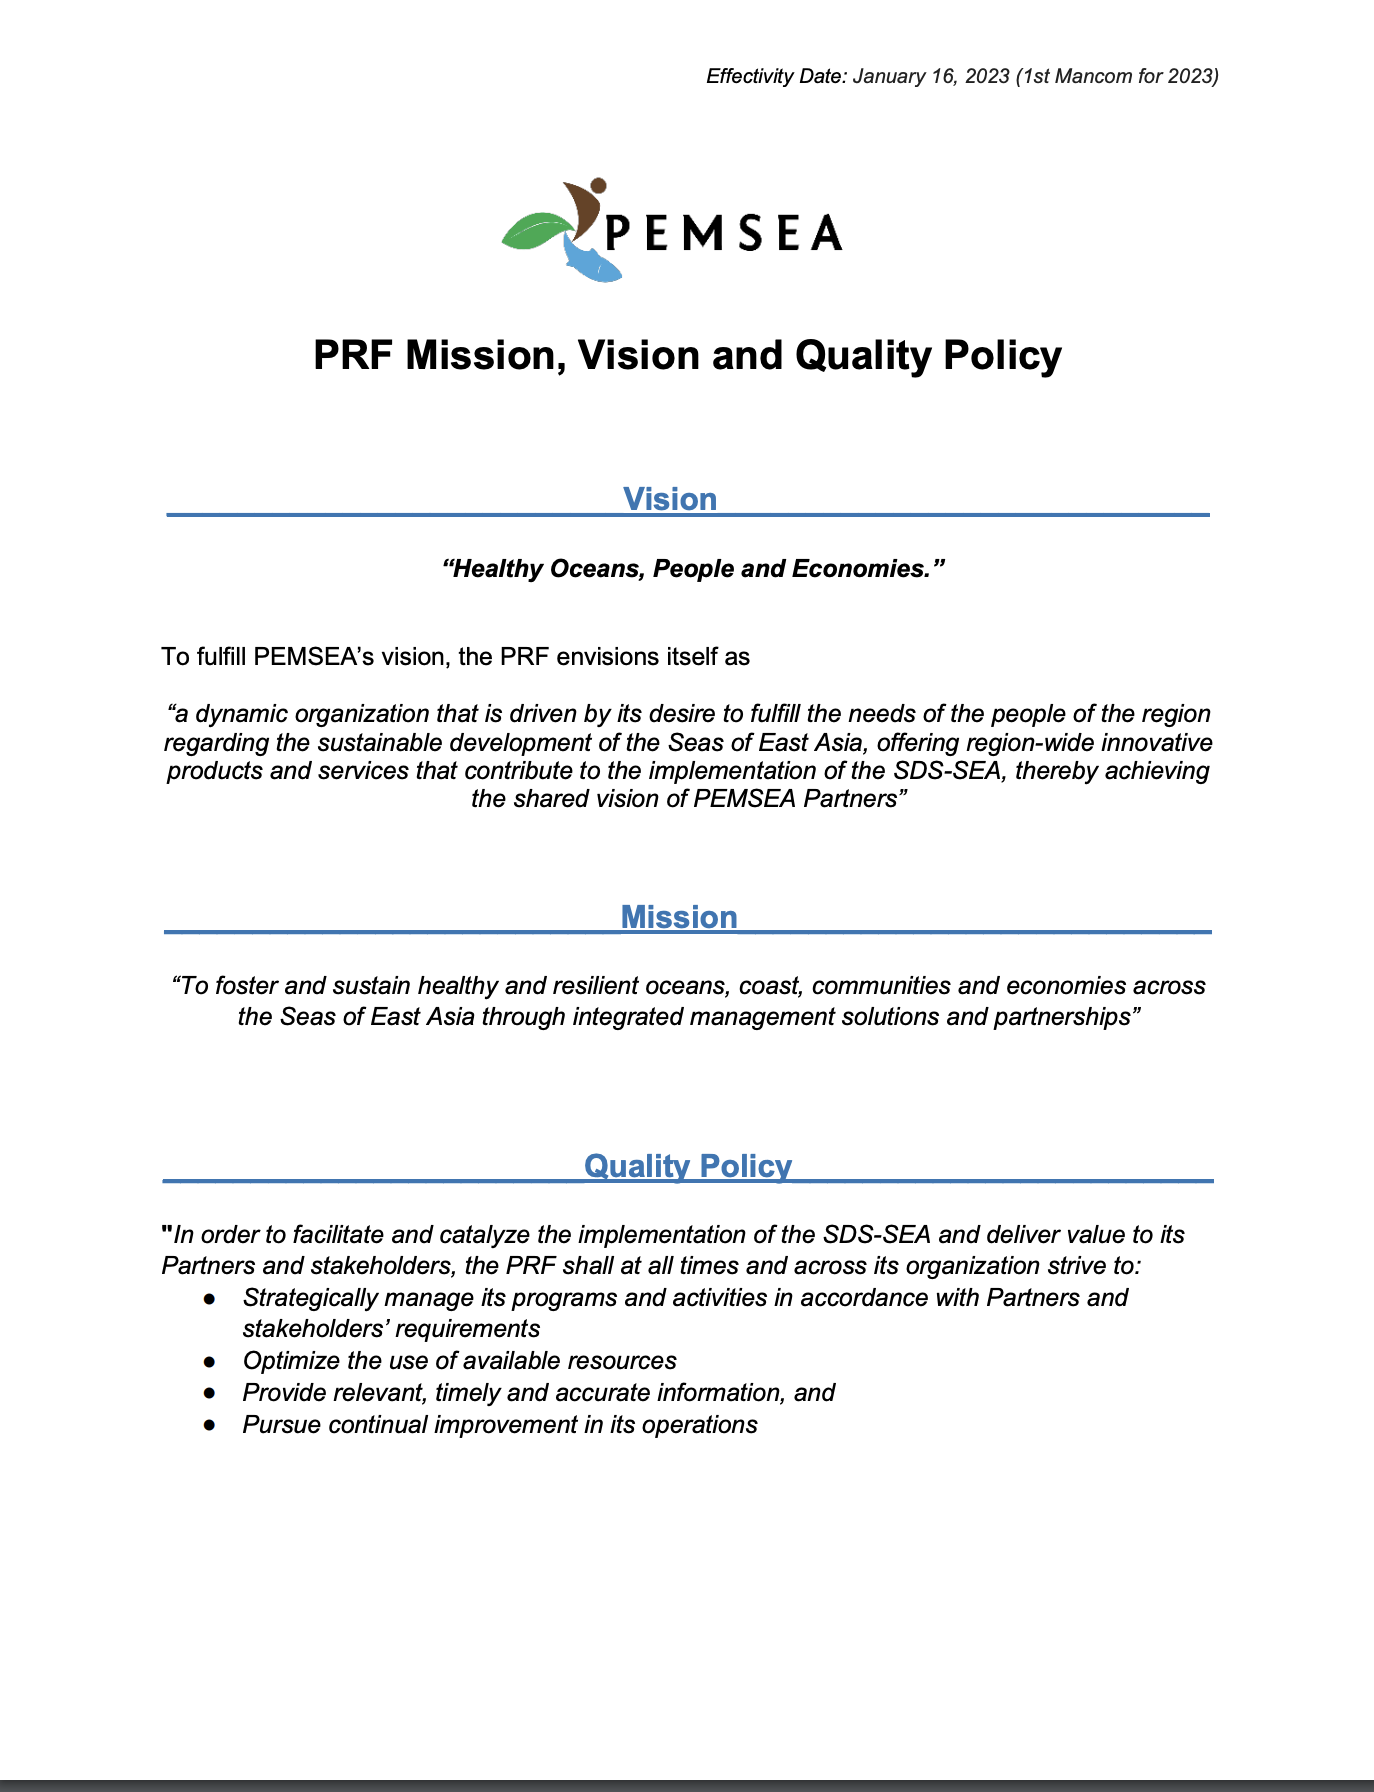 PRF Mission, Vision and Quality Policy